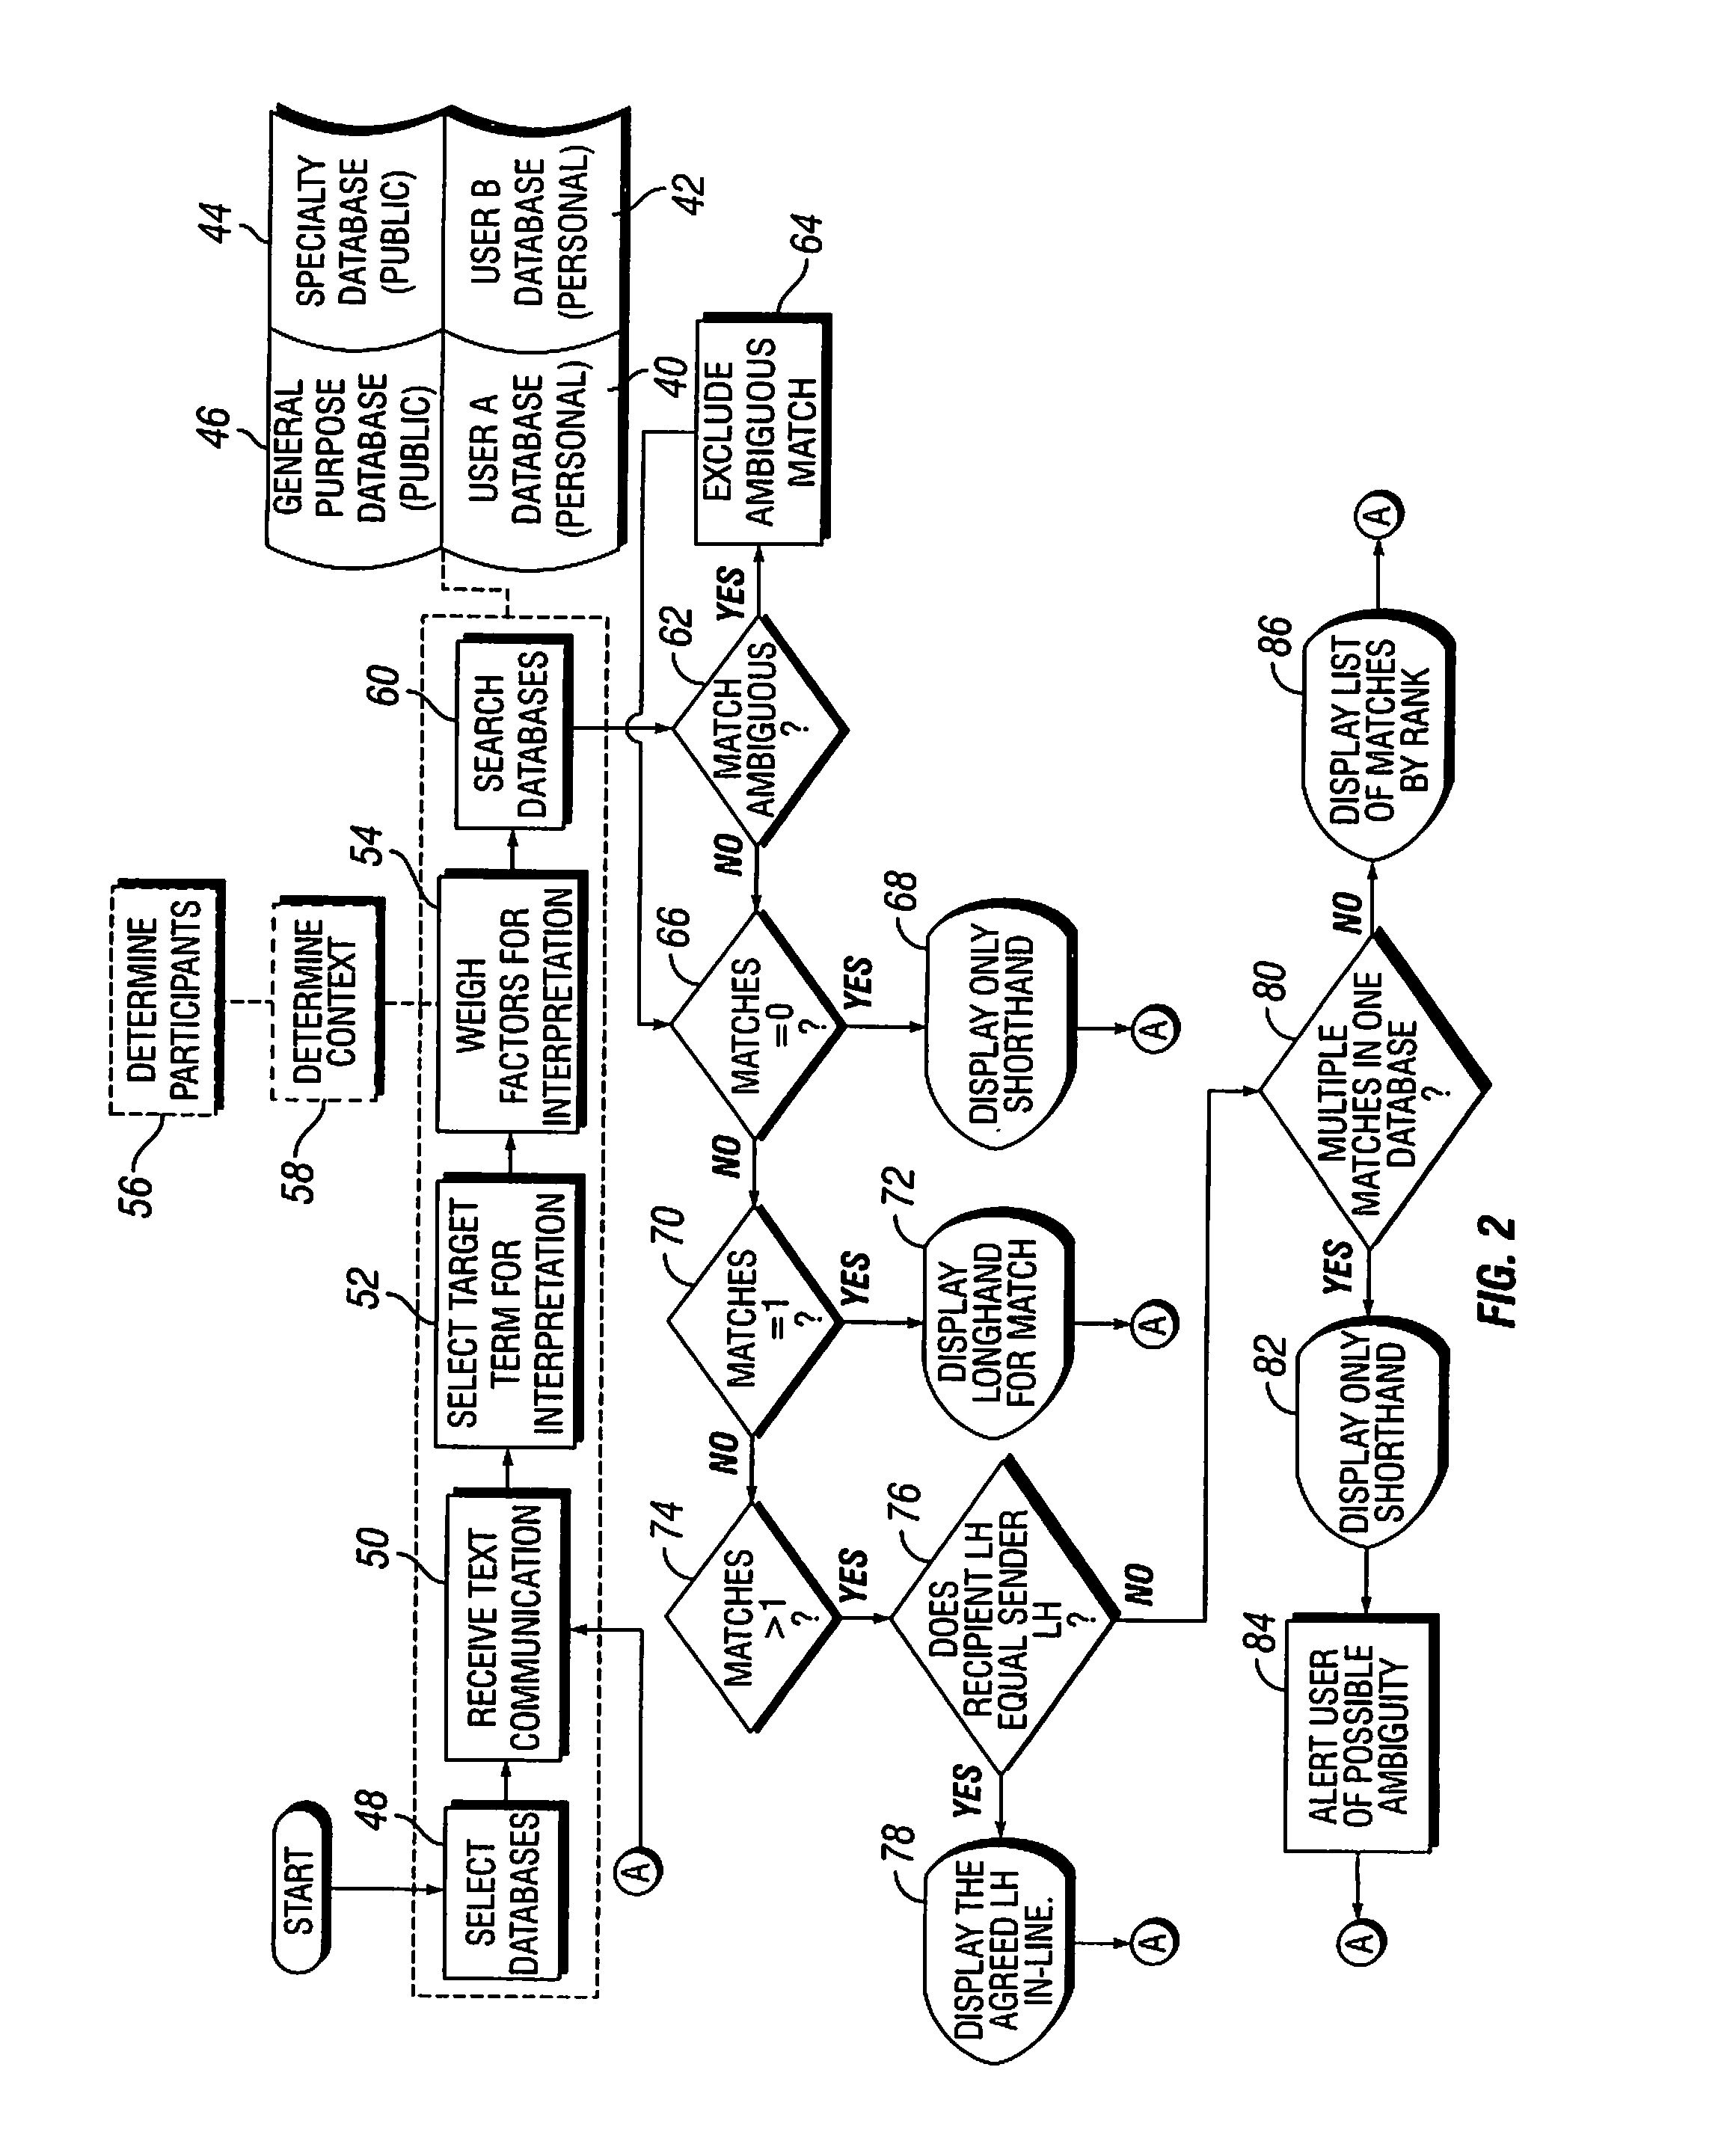 Method and Apparatus for Resolution of Abbreviated Text in an Electronic Communications System